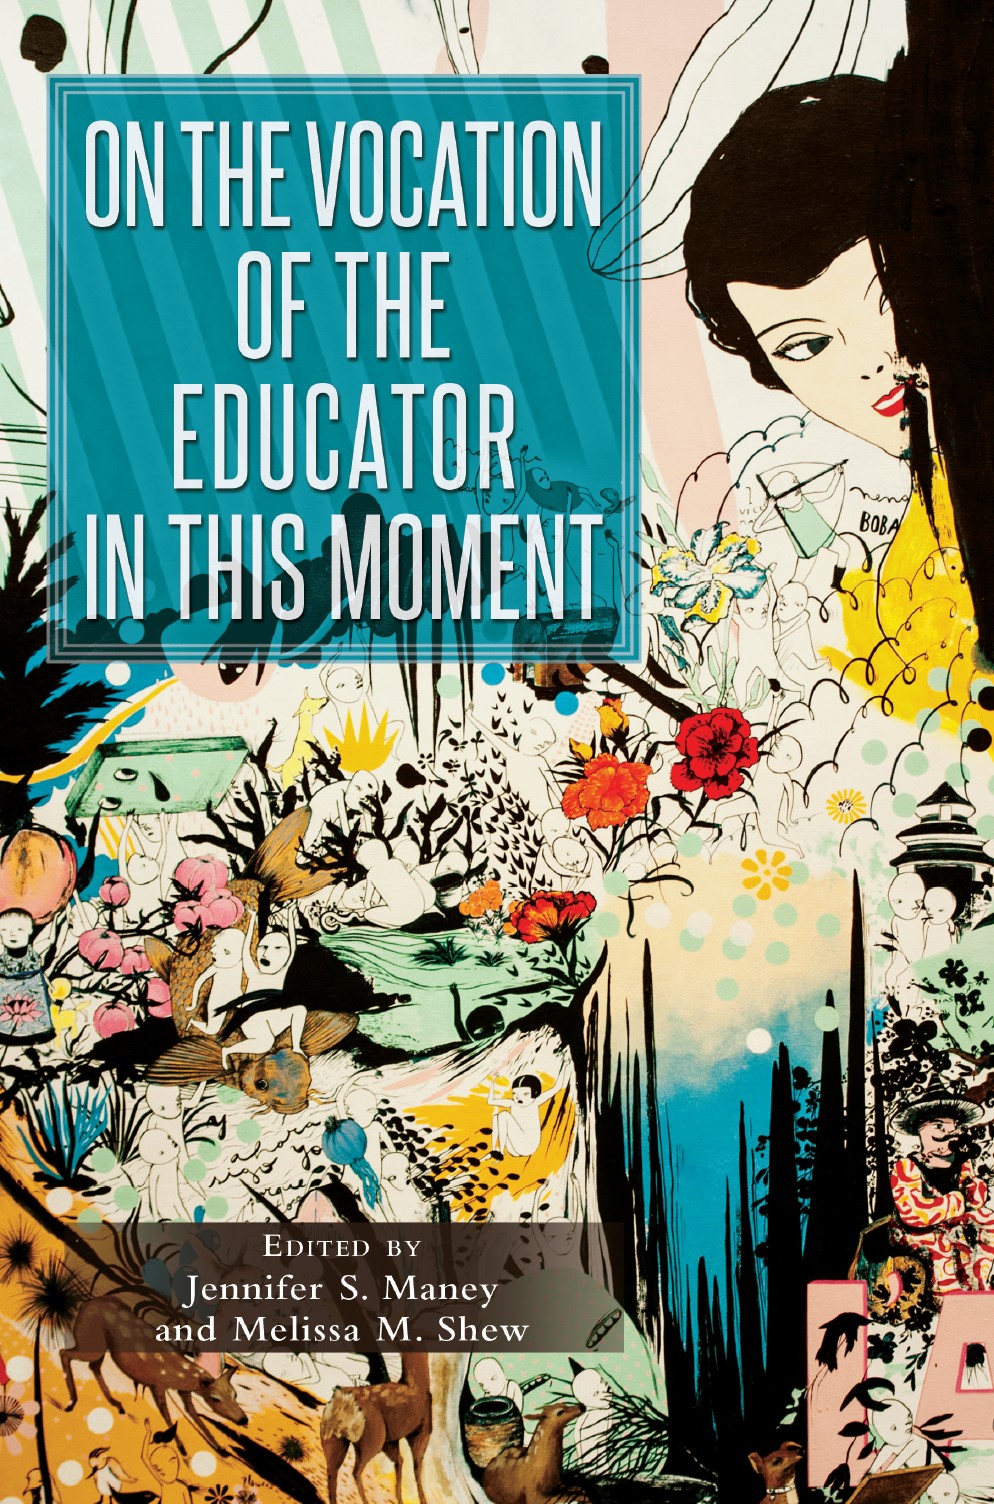 “On the Vocation of the Educator in this Moment” cover